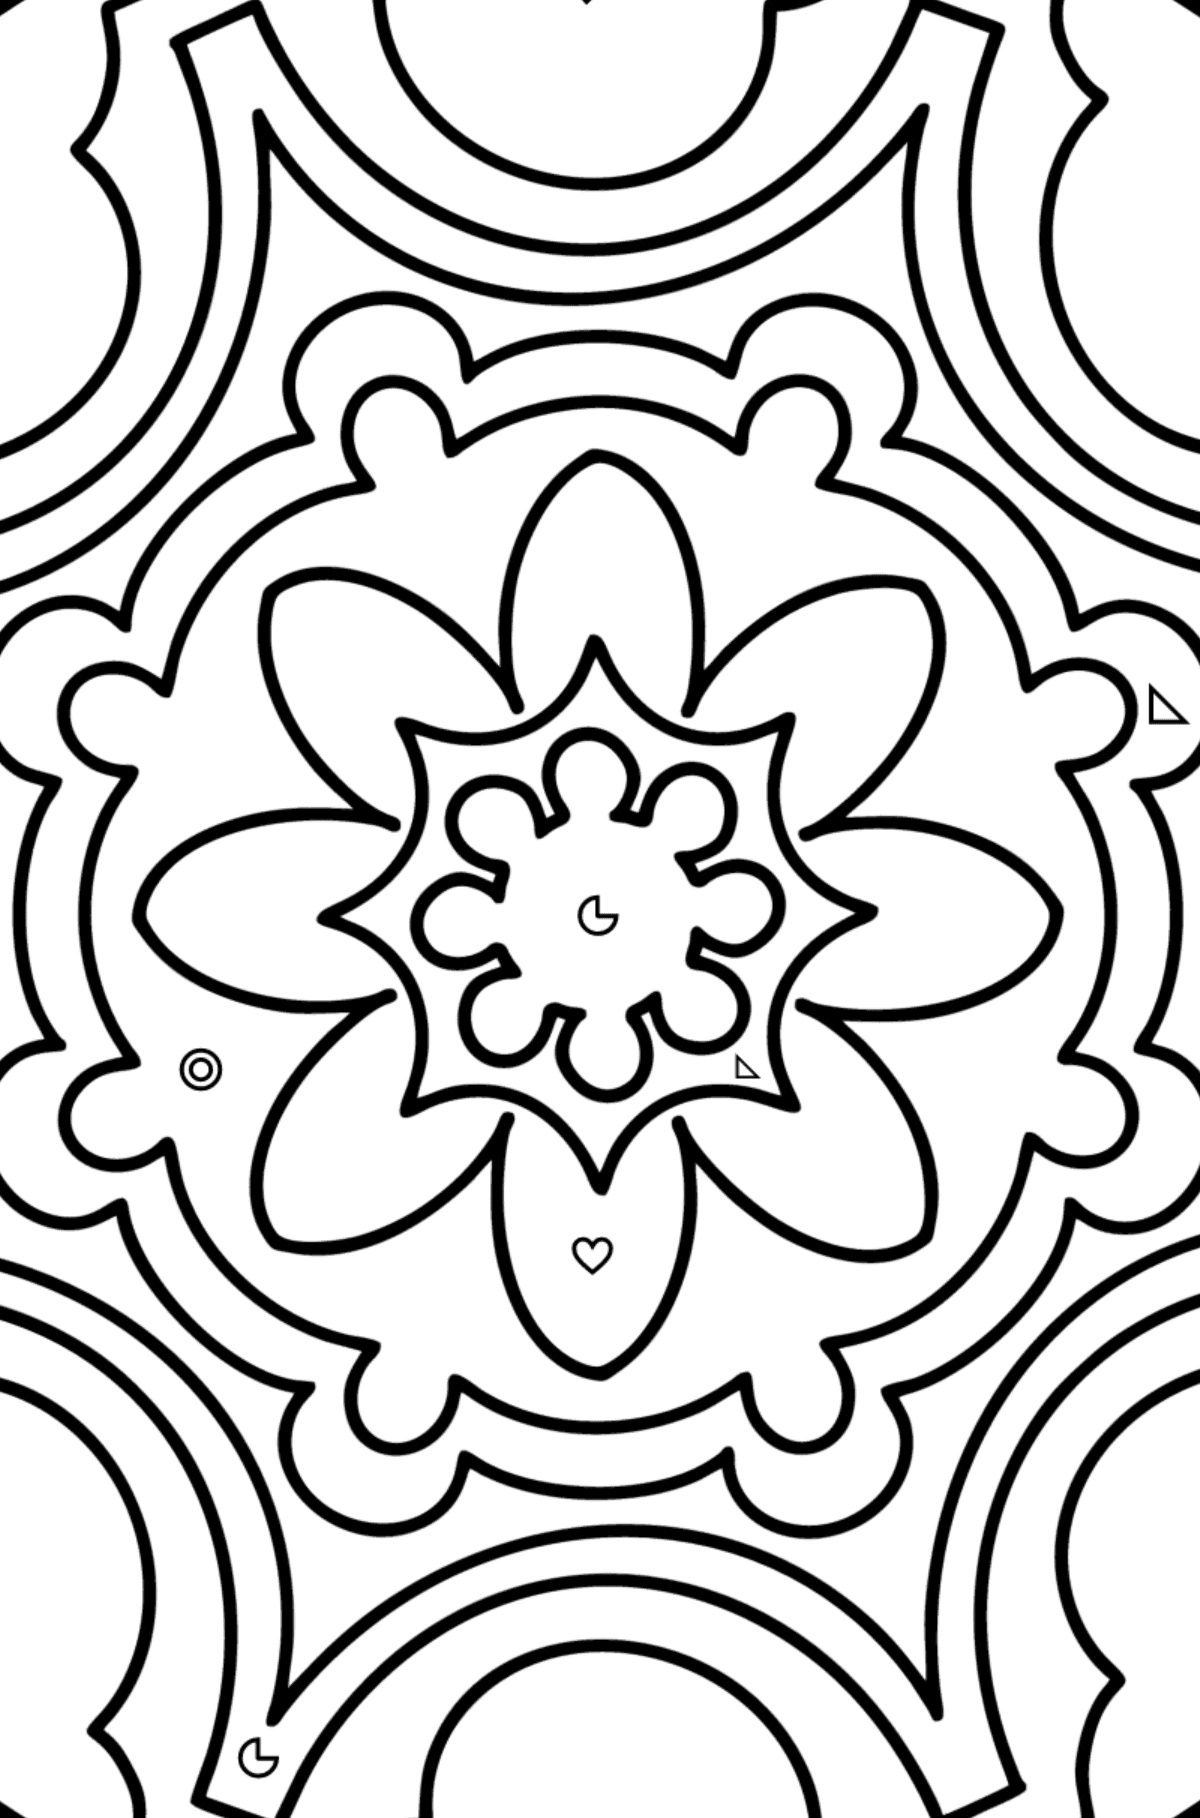 Mandala coloring page - 9 elements - Coloring by Geometric Shapes for Kids